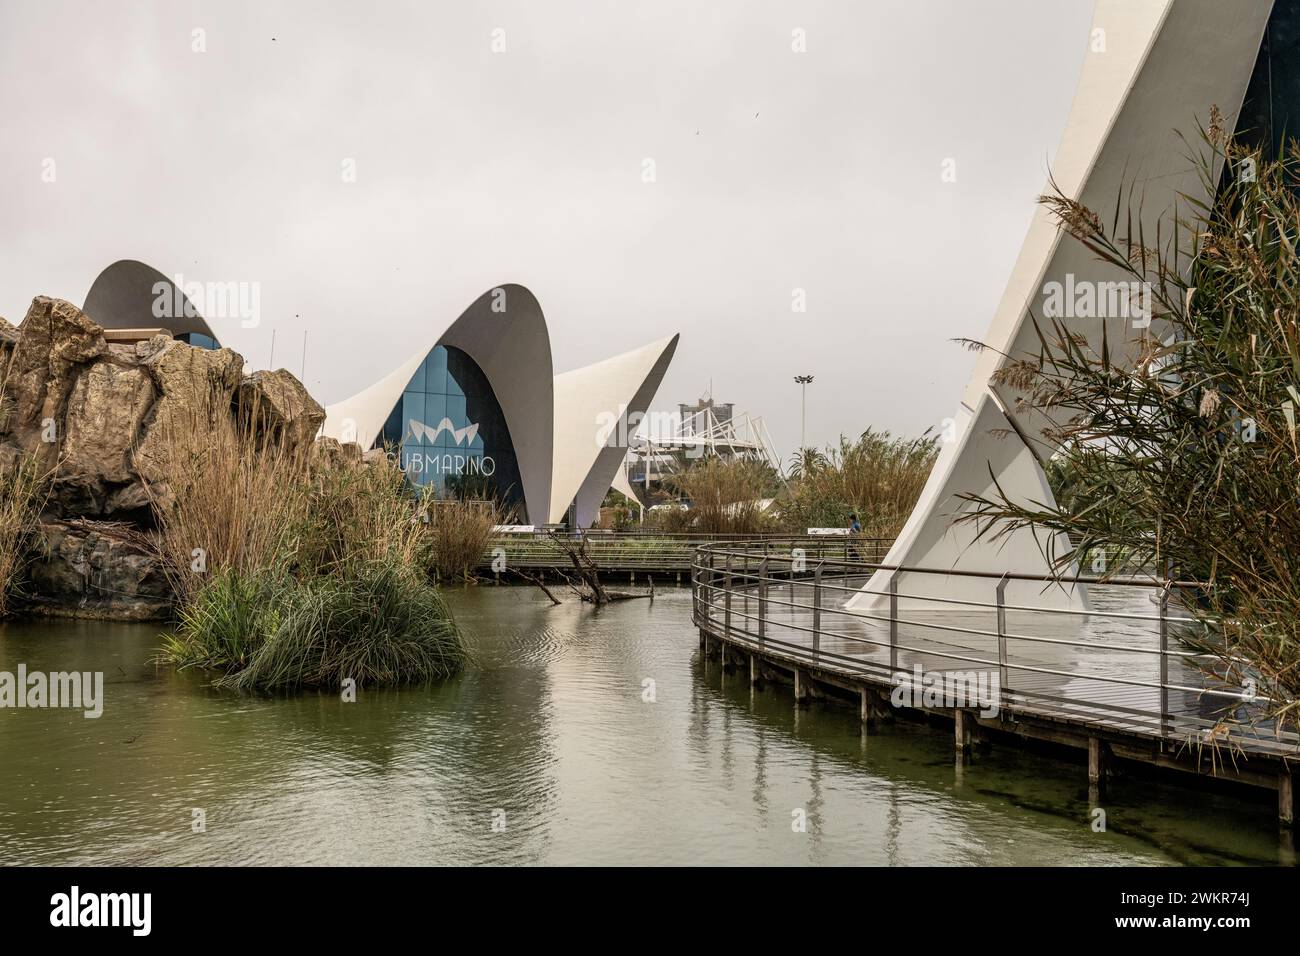 The striking modern architecture of the Oceanografic, the largest aquarium in Europe, on a rainy day in Valencia, Spain Stock Photo